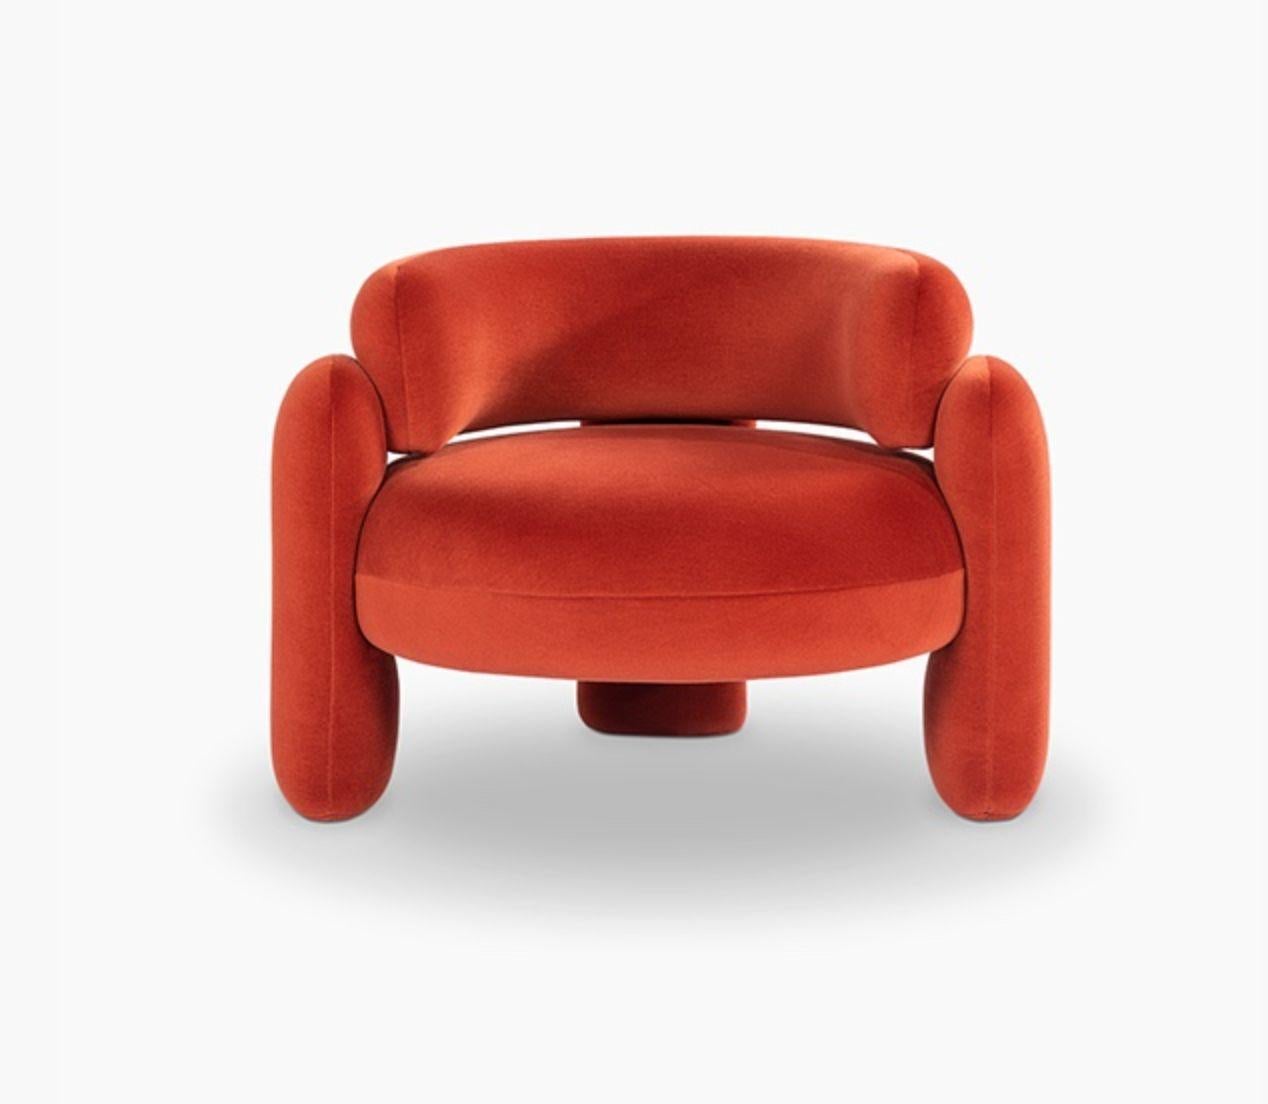 Embrace armchair by Royal Stranger
Dimensions: 96 x 85 x 68 cm
Different upholstery colors and finishes are available.
Materials: Velvet

Featuring an enfolding composition of geometrical shapes, the embrace armchair will cozy you up in a